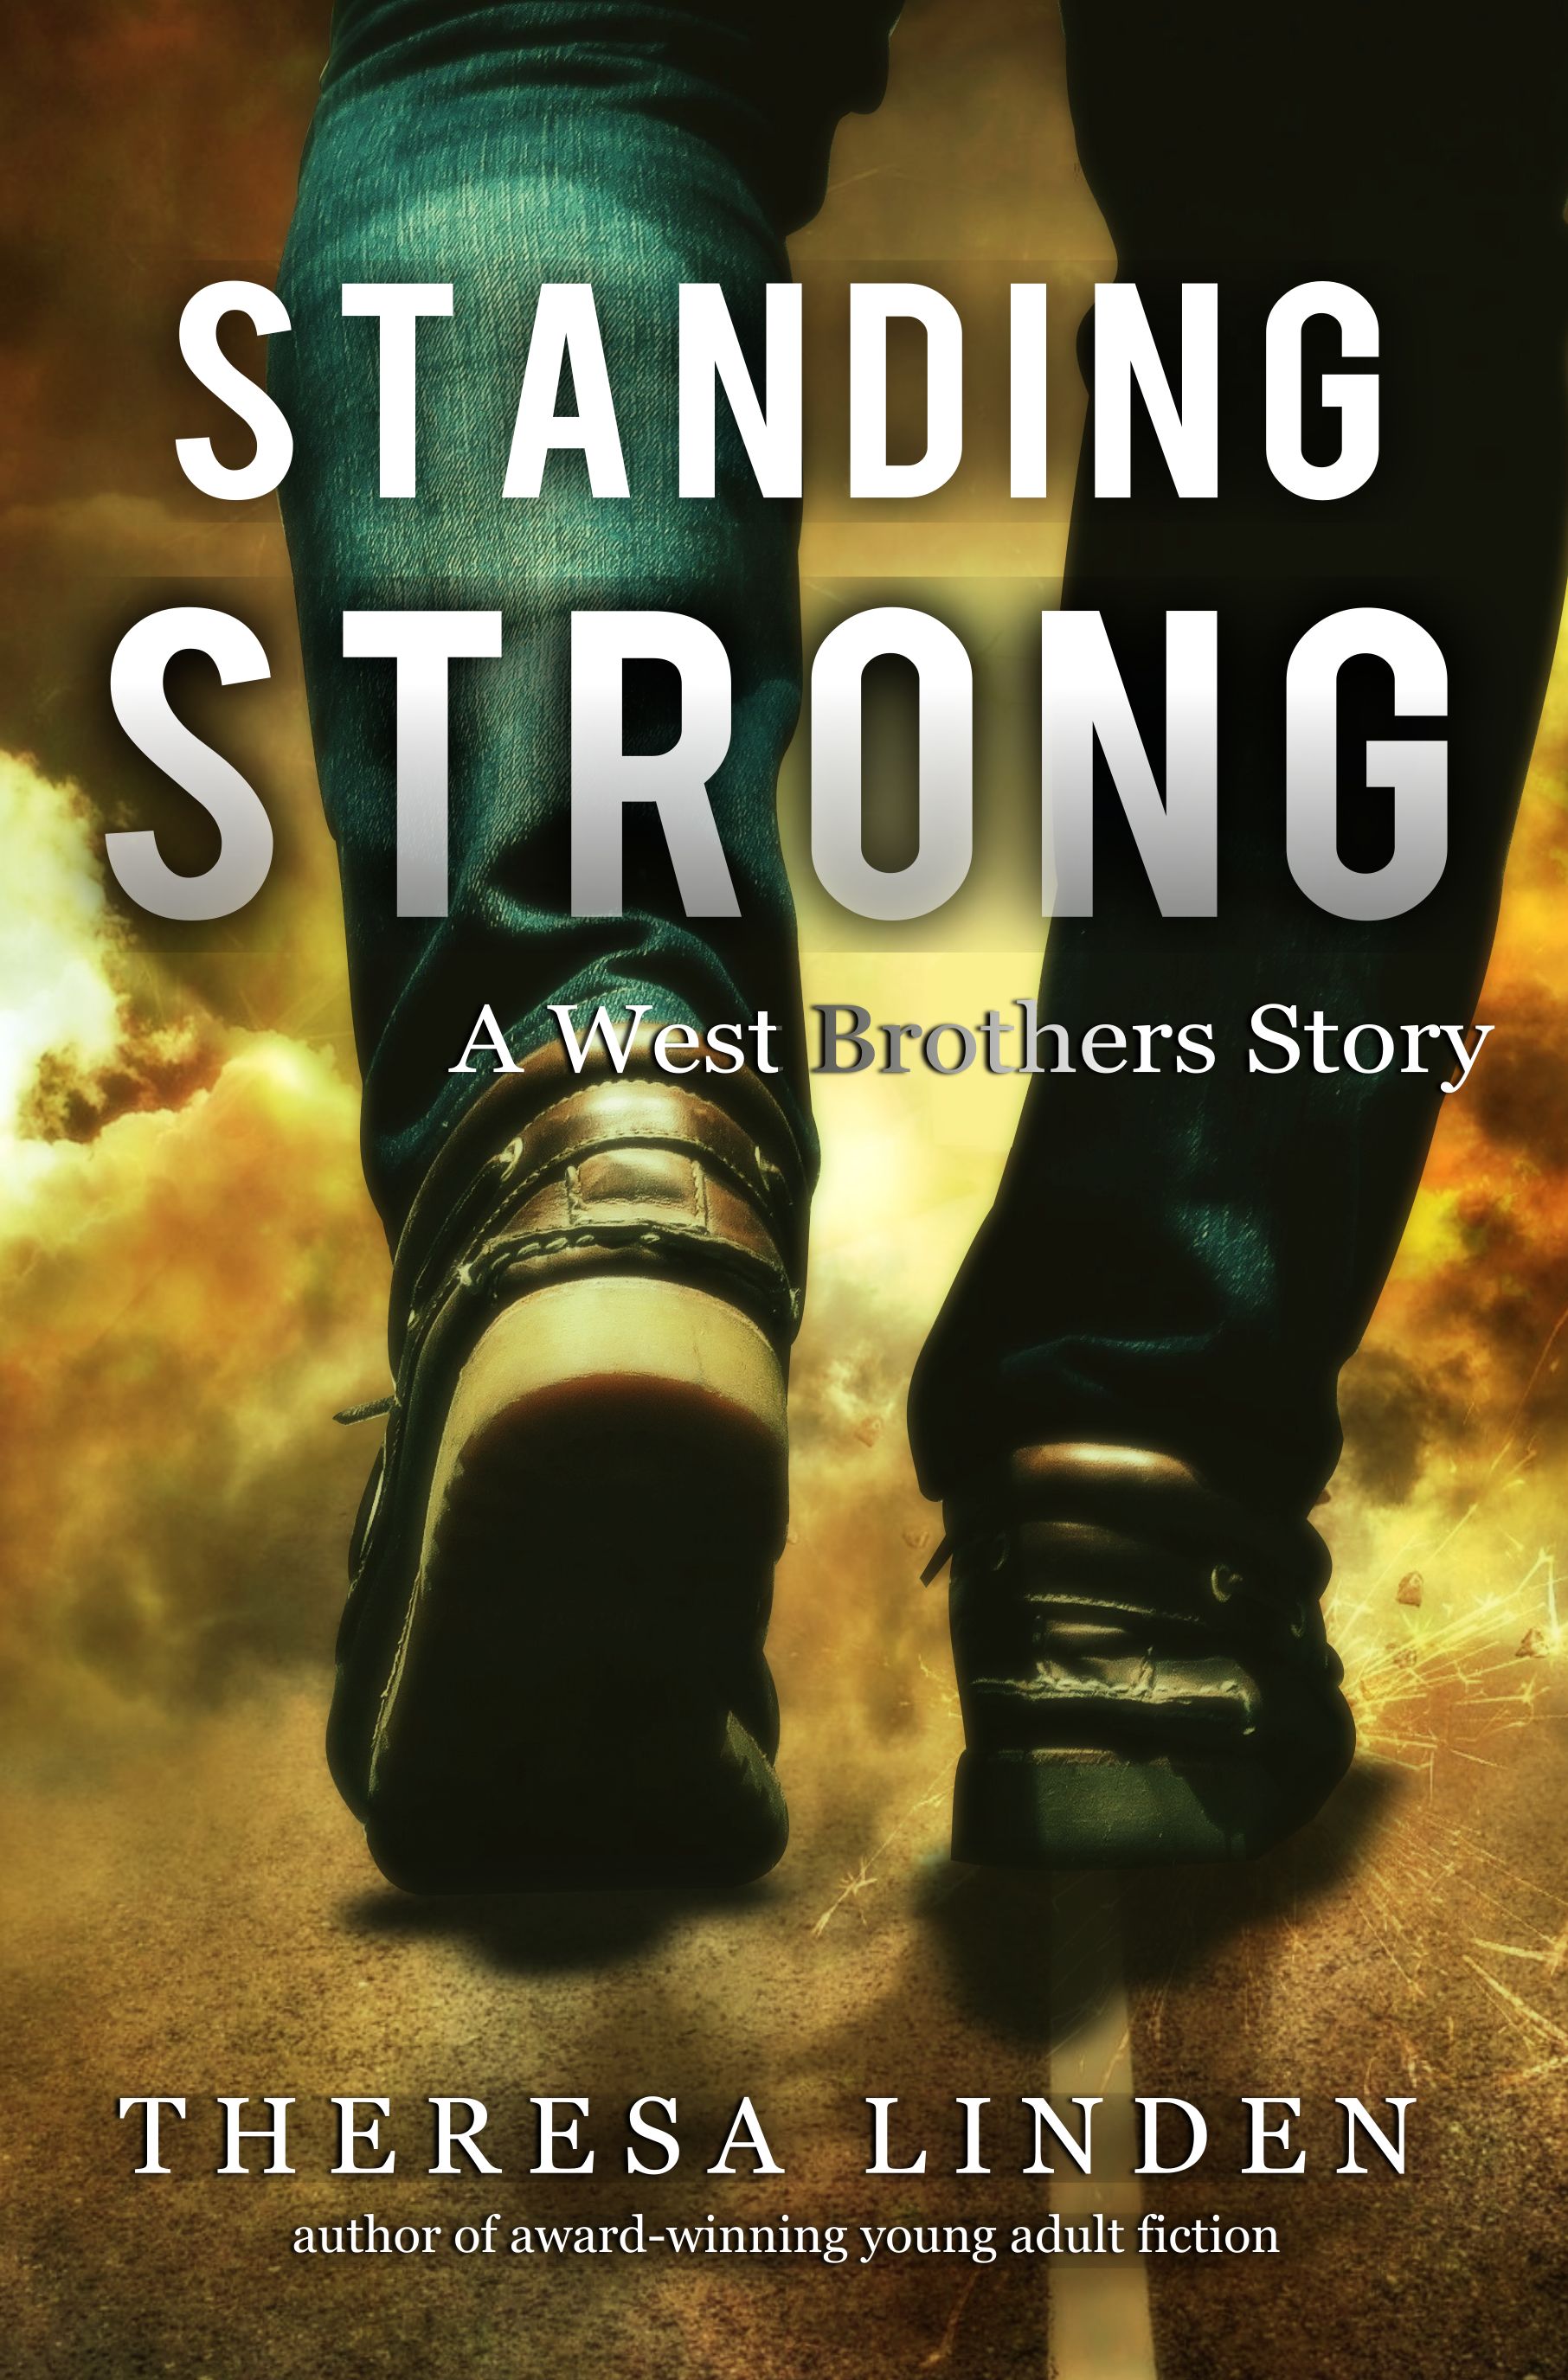 Westerlies brother. W brothers. Teresa strong Wilson's Touchstone stories. Stand strong